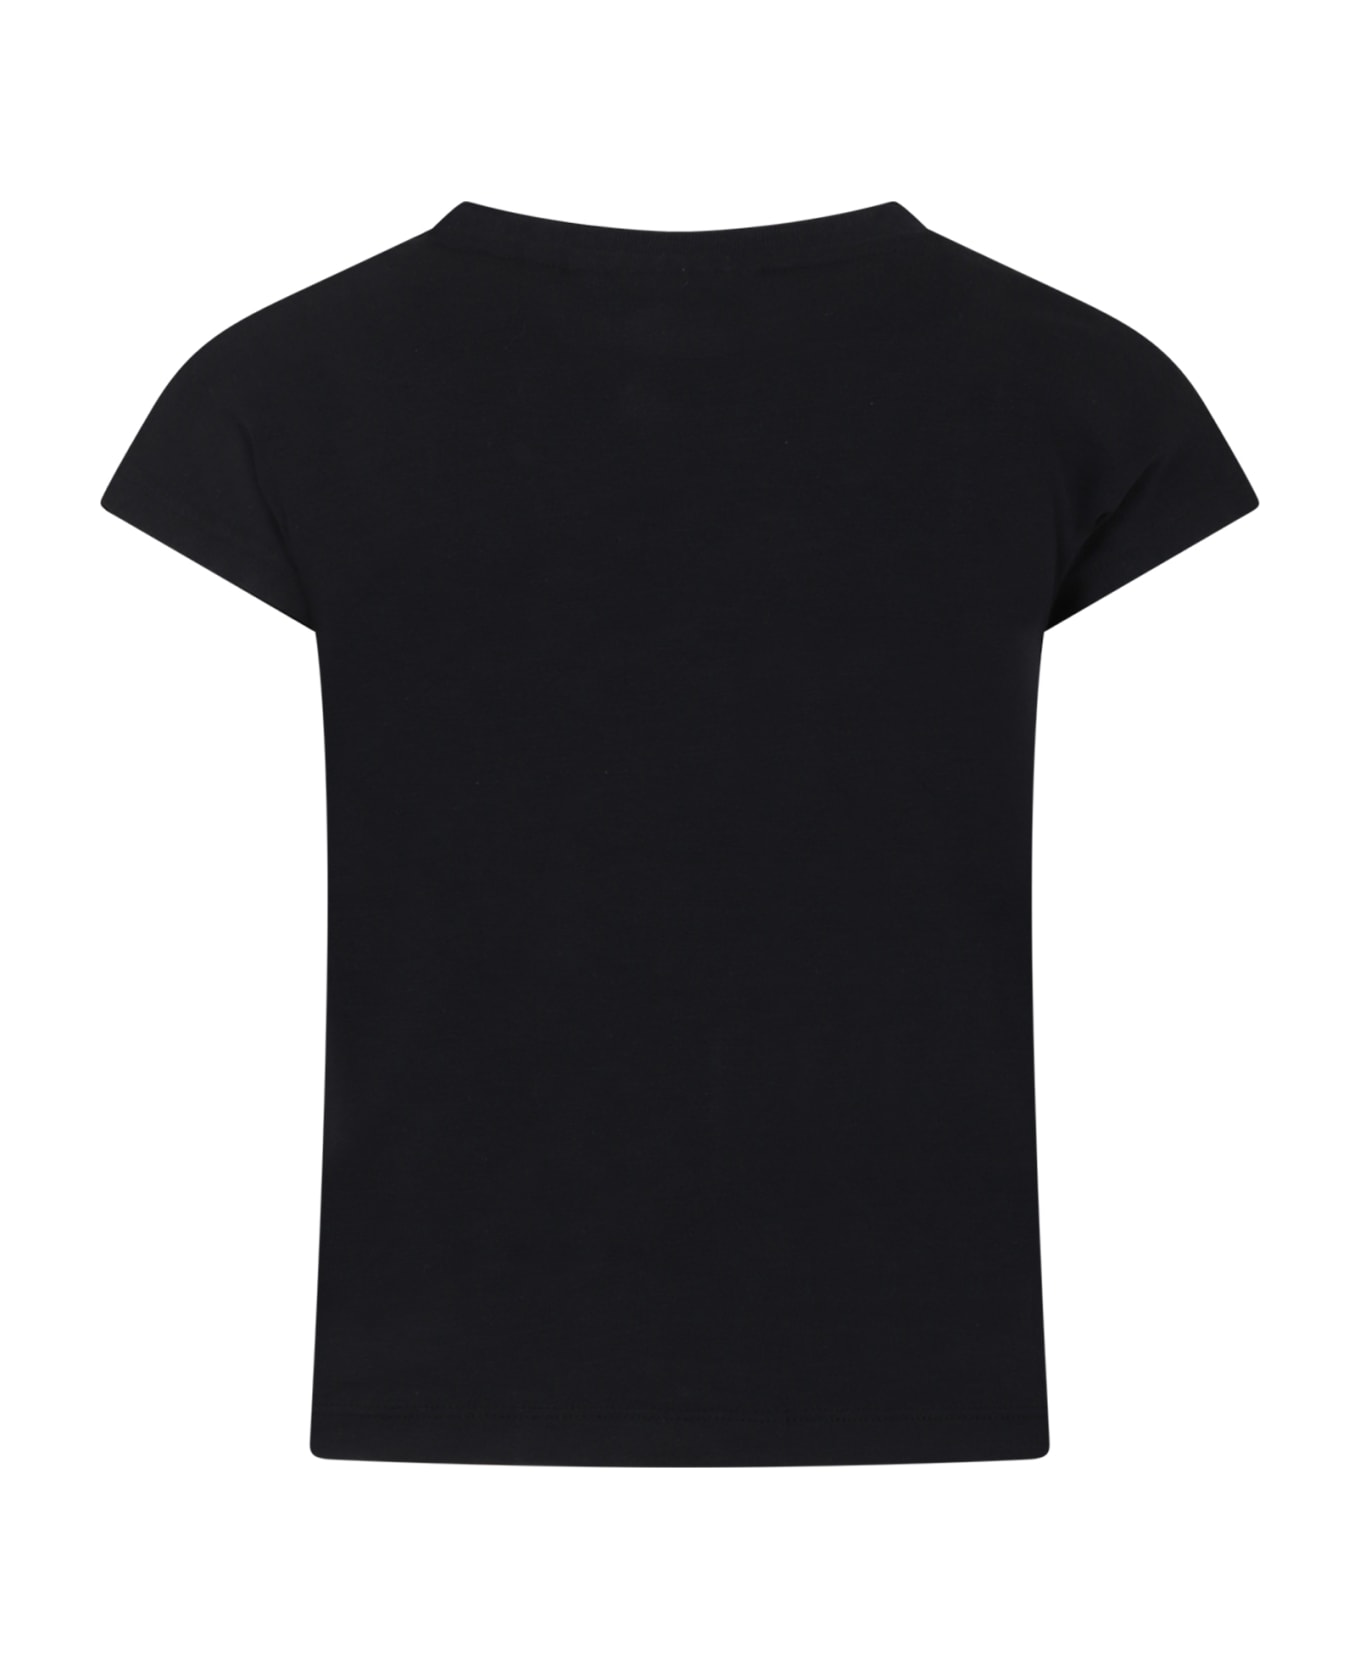 Molo Black T-shirt For Girl With Cat Print - Black